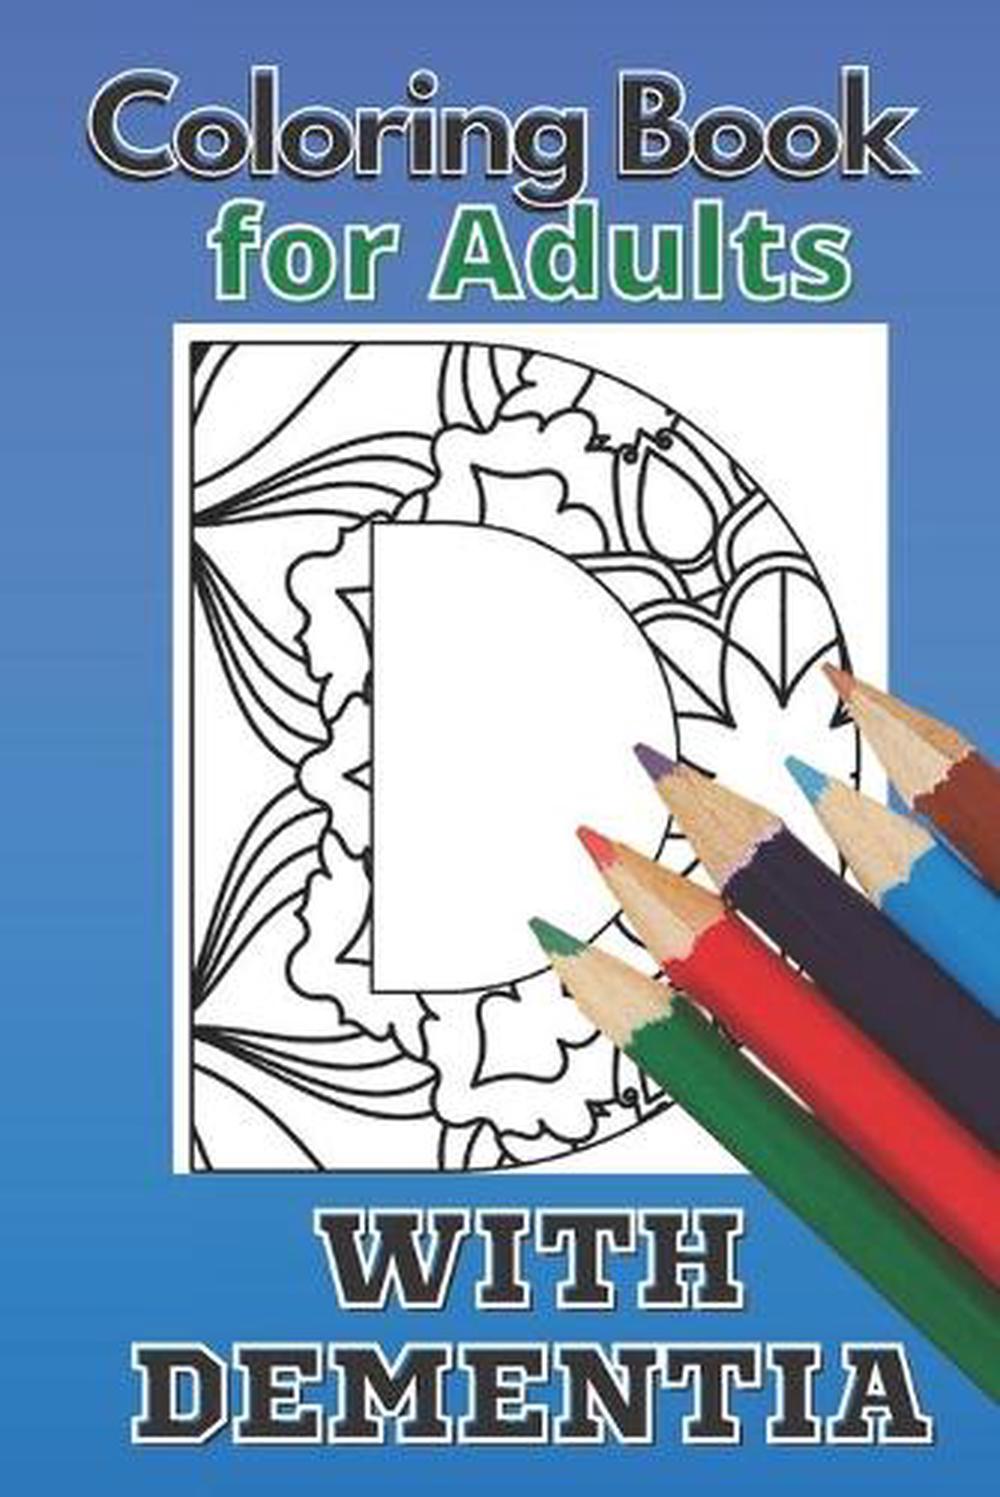 Coloring Book For Adults With Dementia By Conac Paperback 9798701990959 Buy Online At Moby The Great